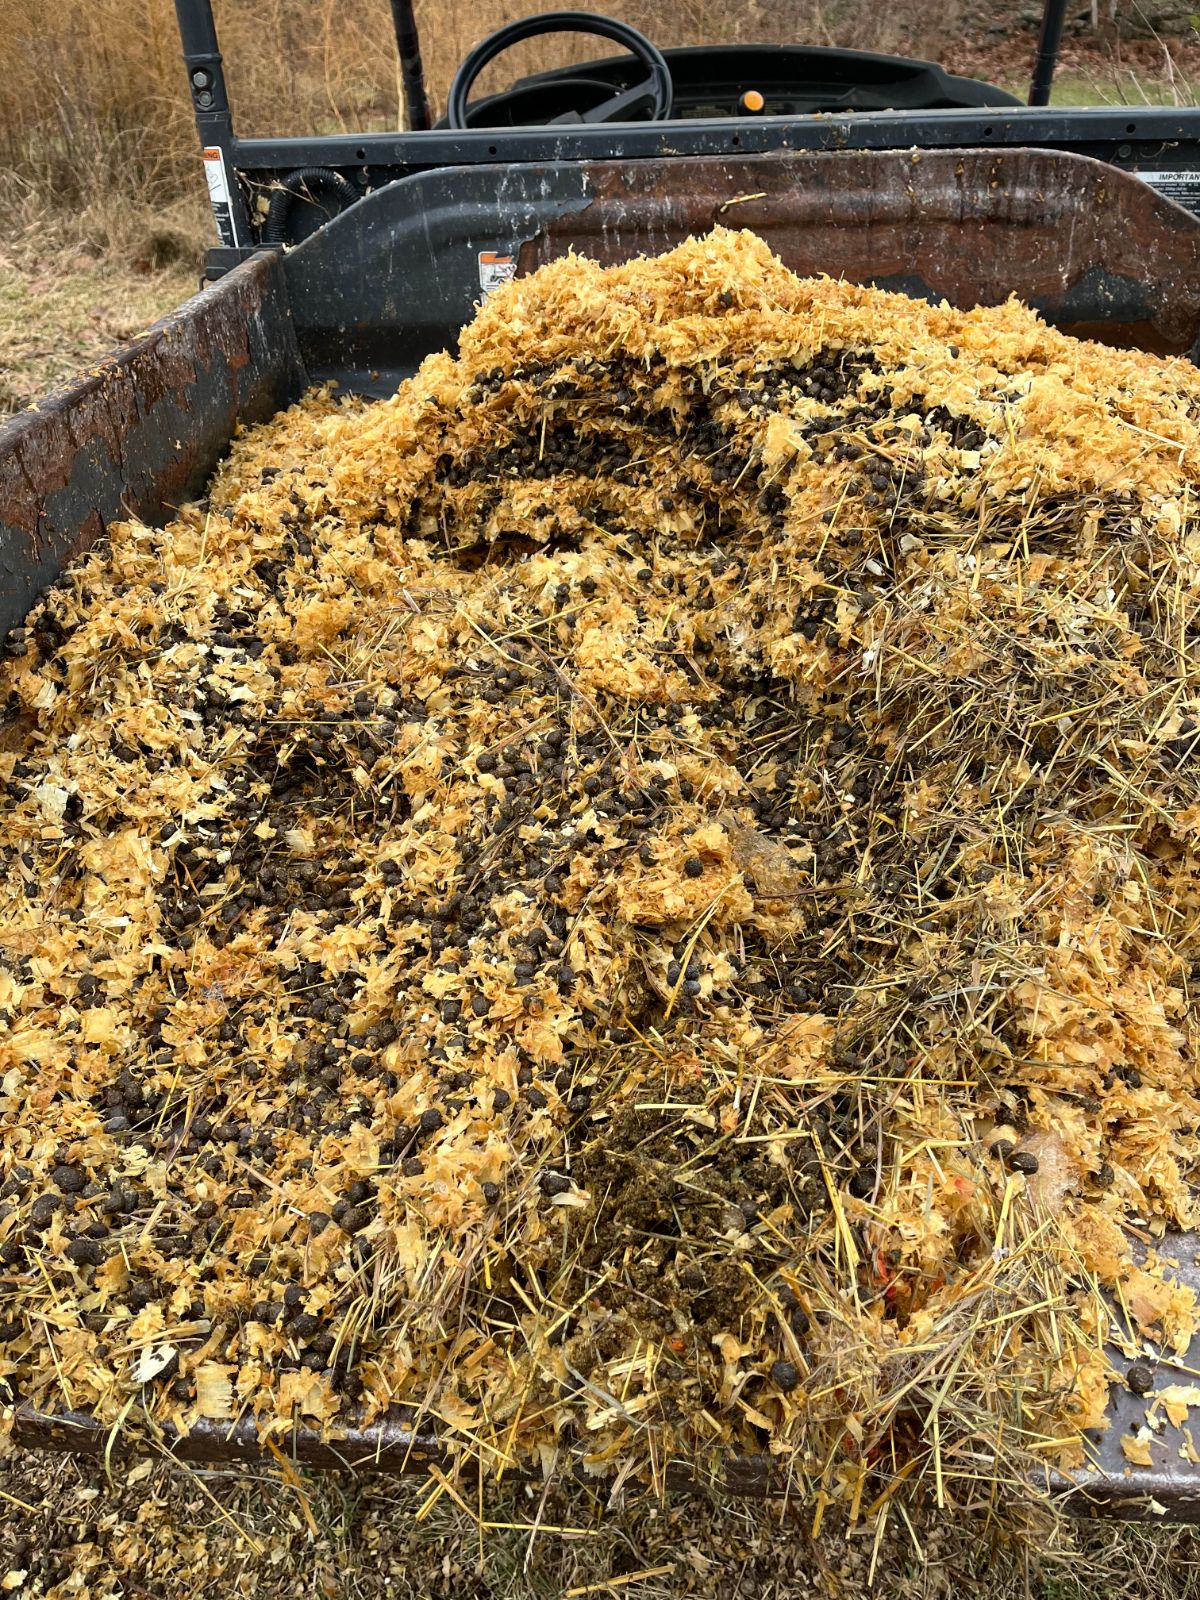 Rabbit manure and shavings ready to spread over winter ground